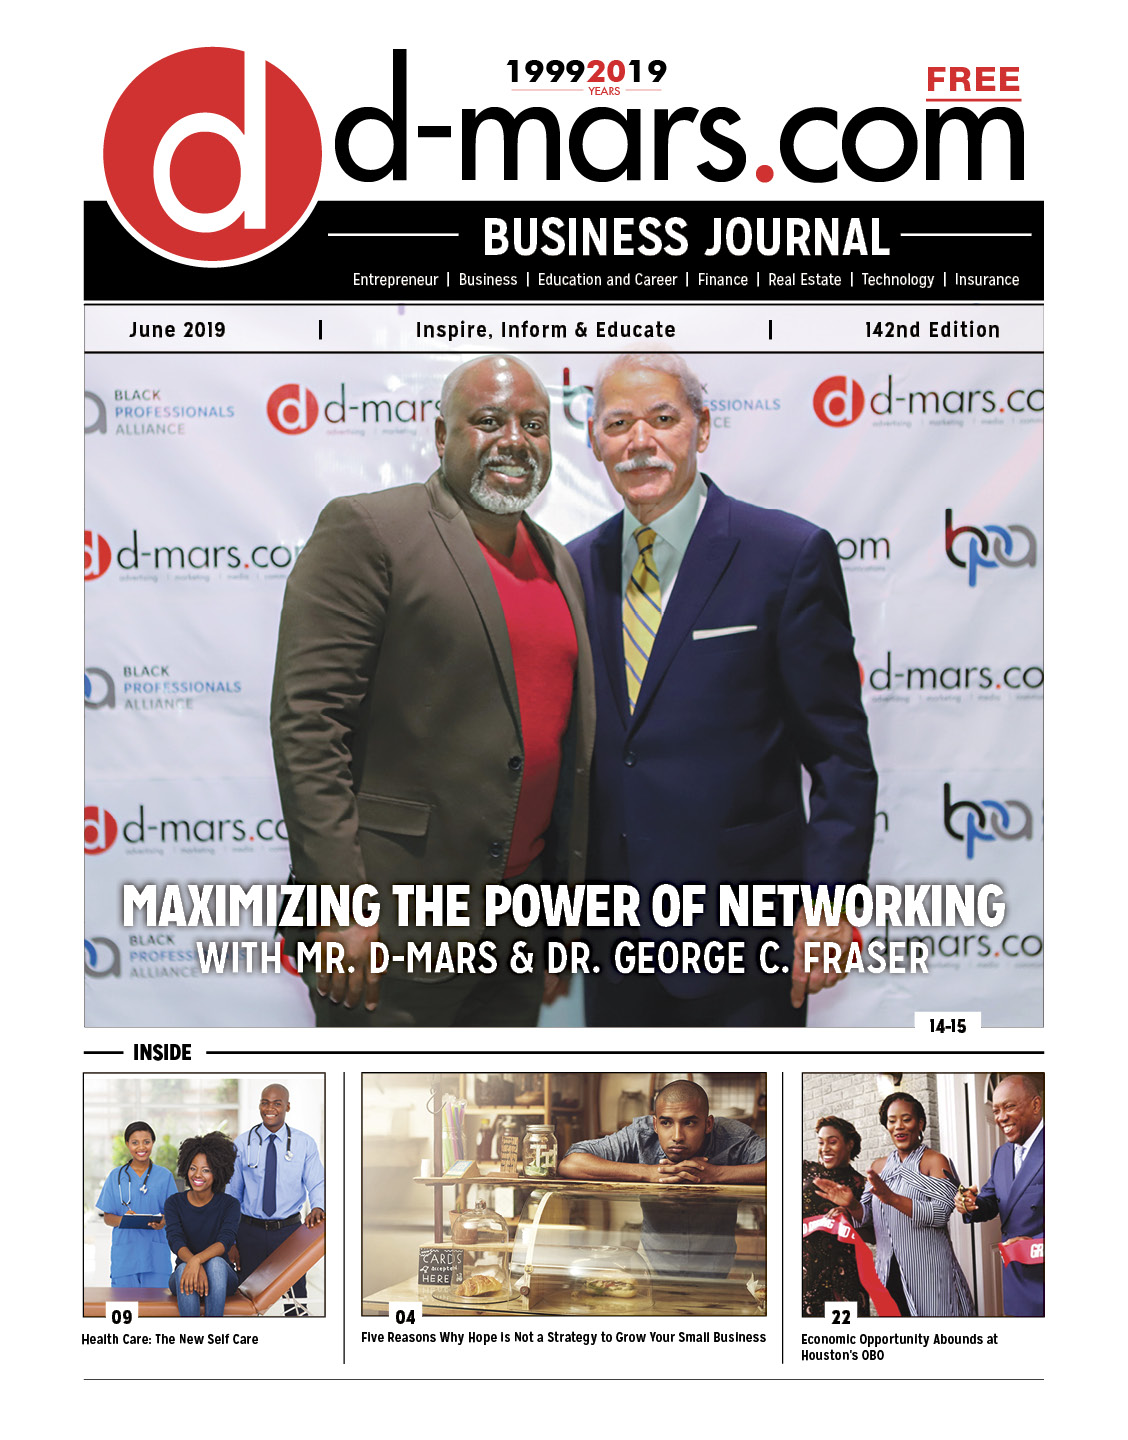 Maximizing the Power of Networking with Mr. D-MARS & Dr. George C. Fraser